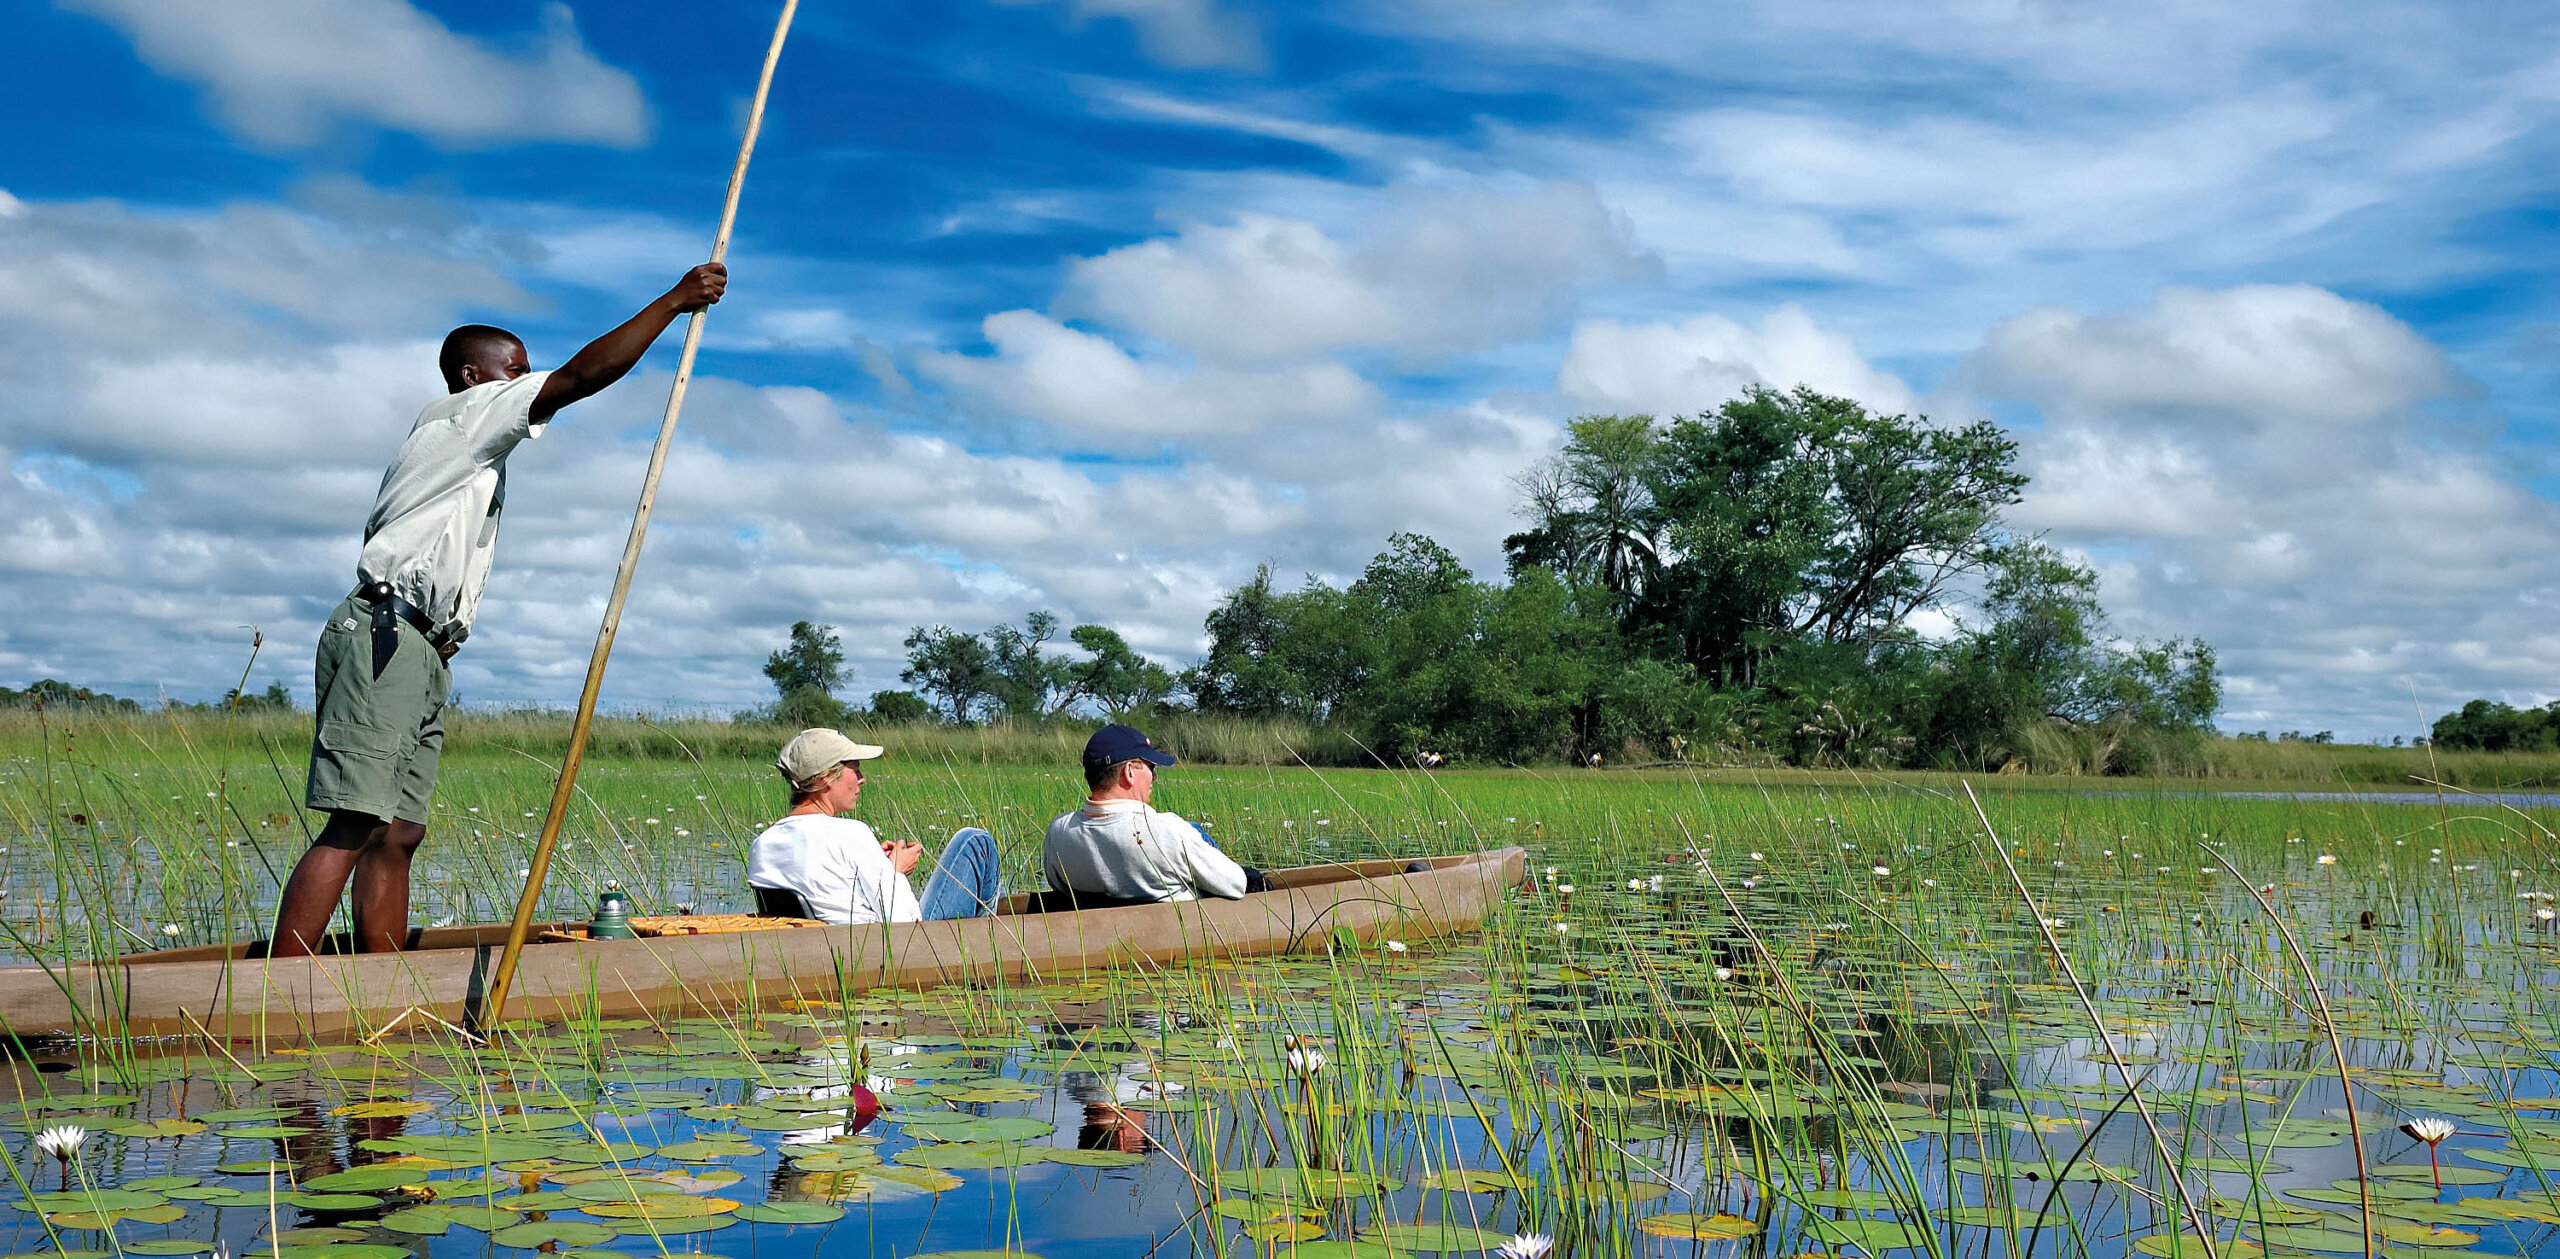 Botswana: What makes the world's most expensive safaris so special